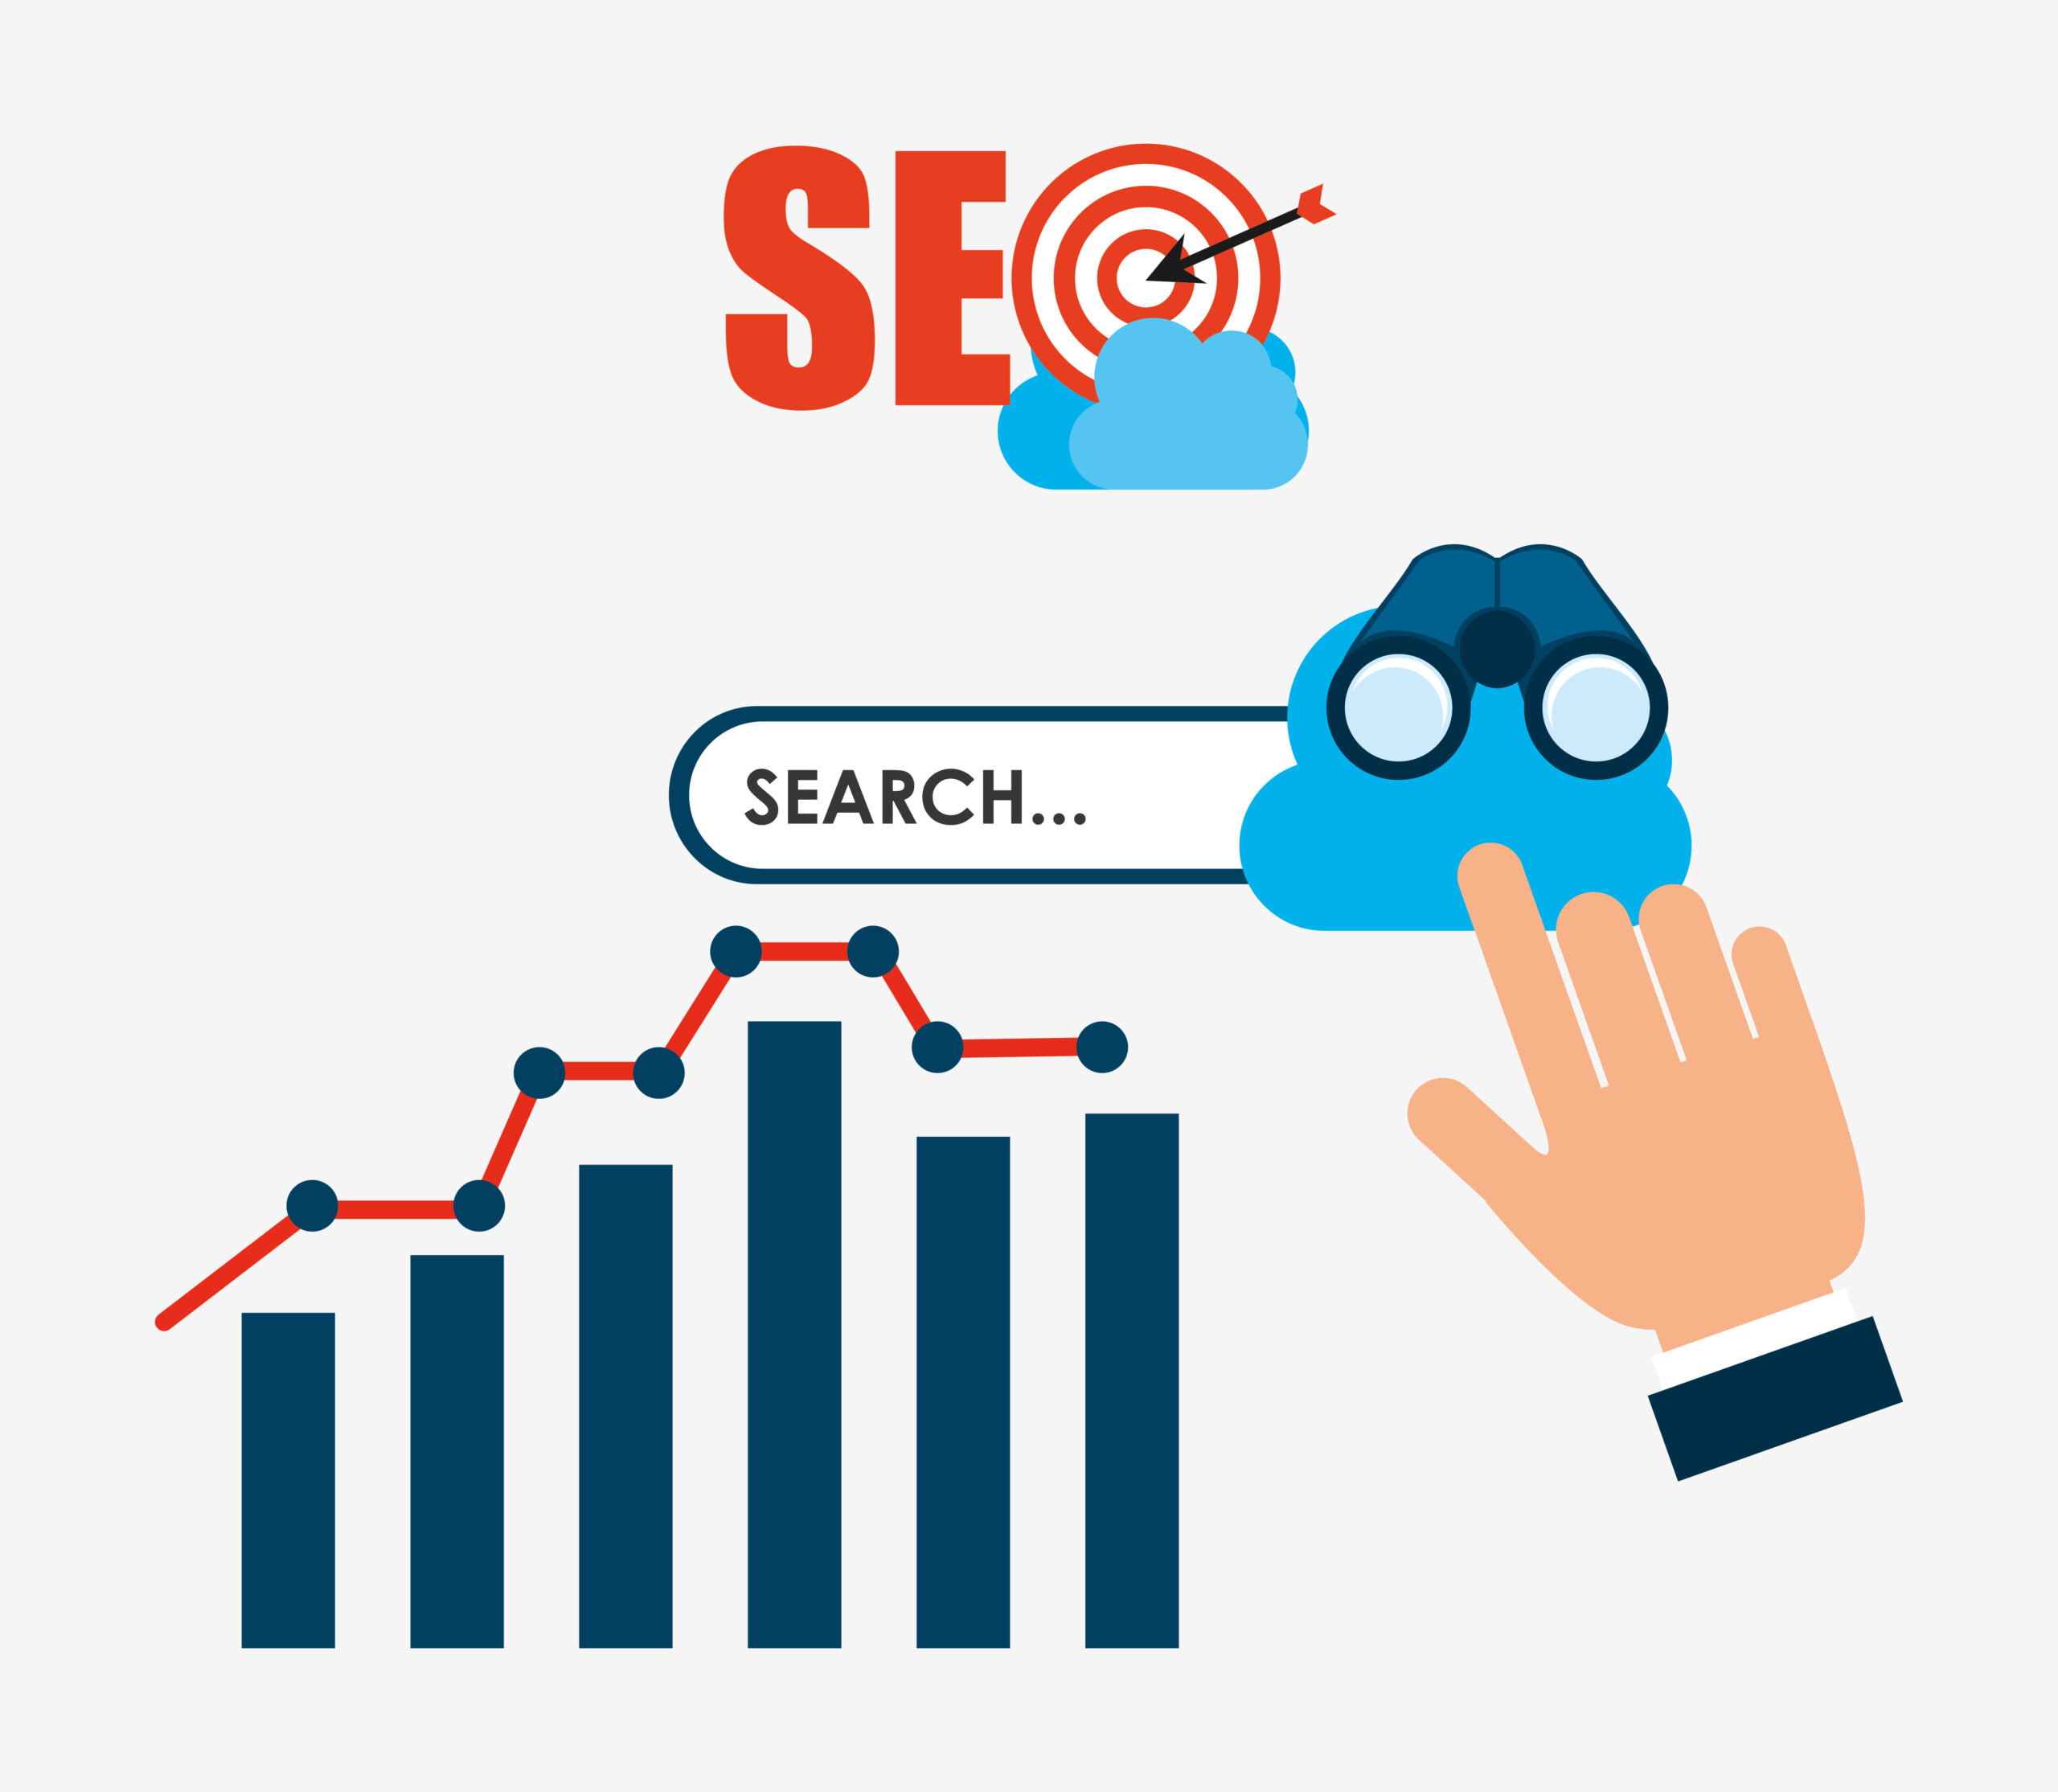 Ways in which an SEO Agency can grow your company and business